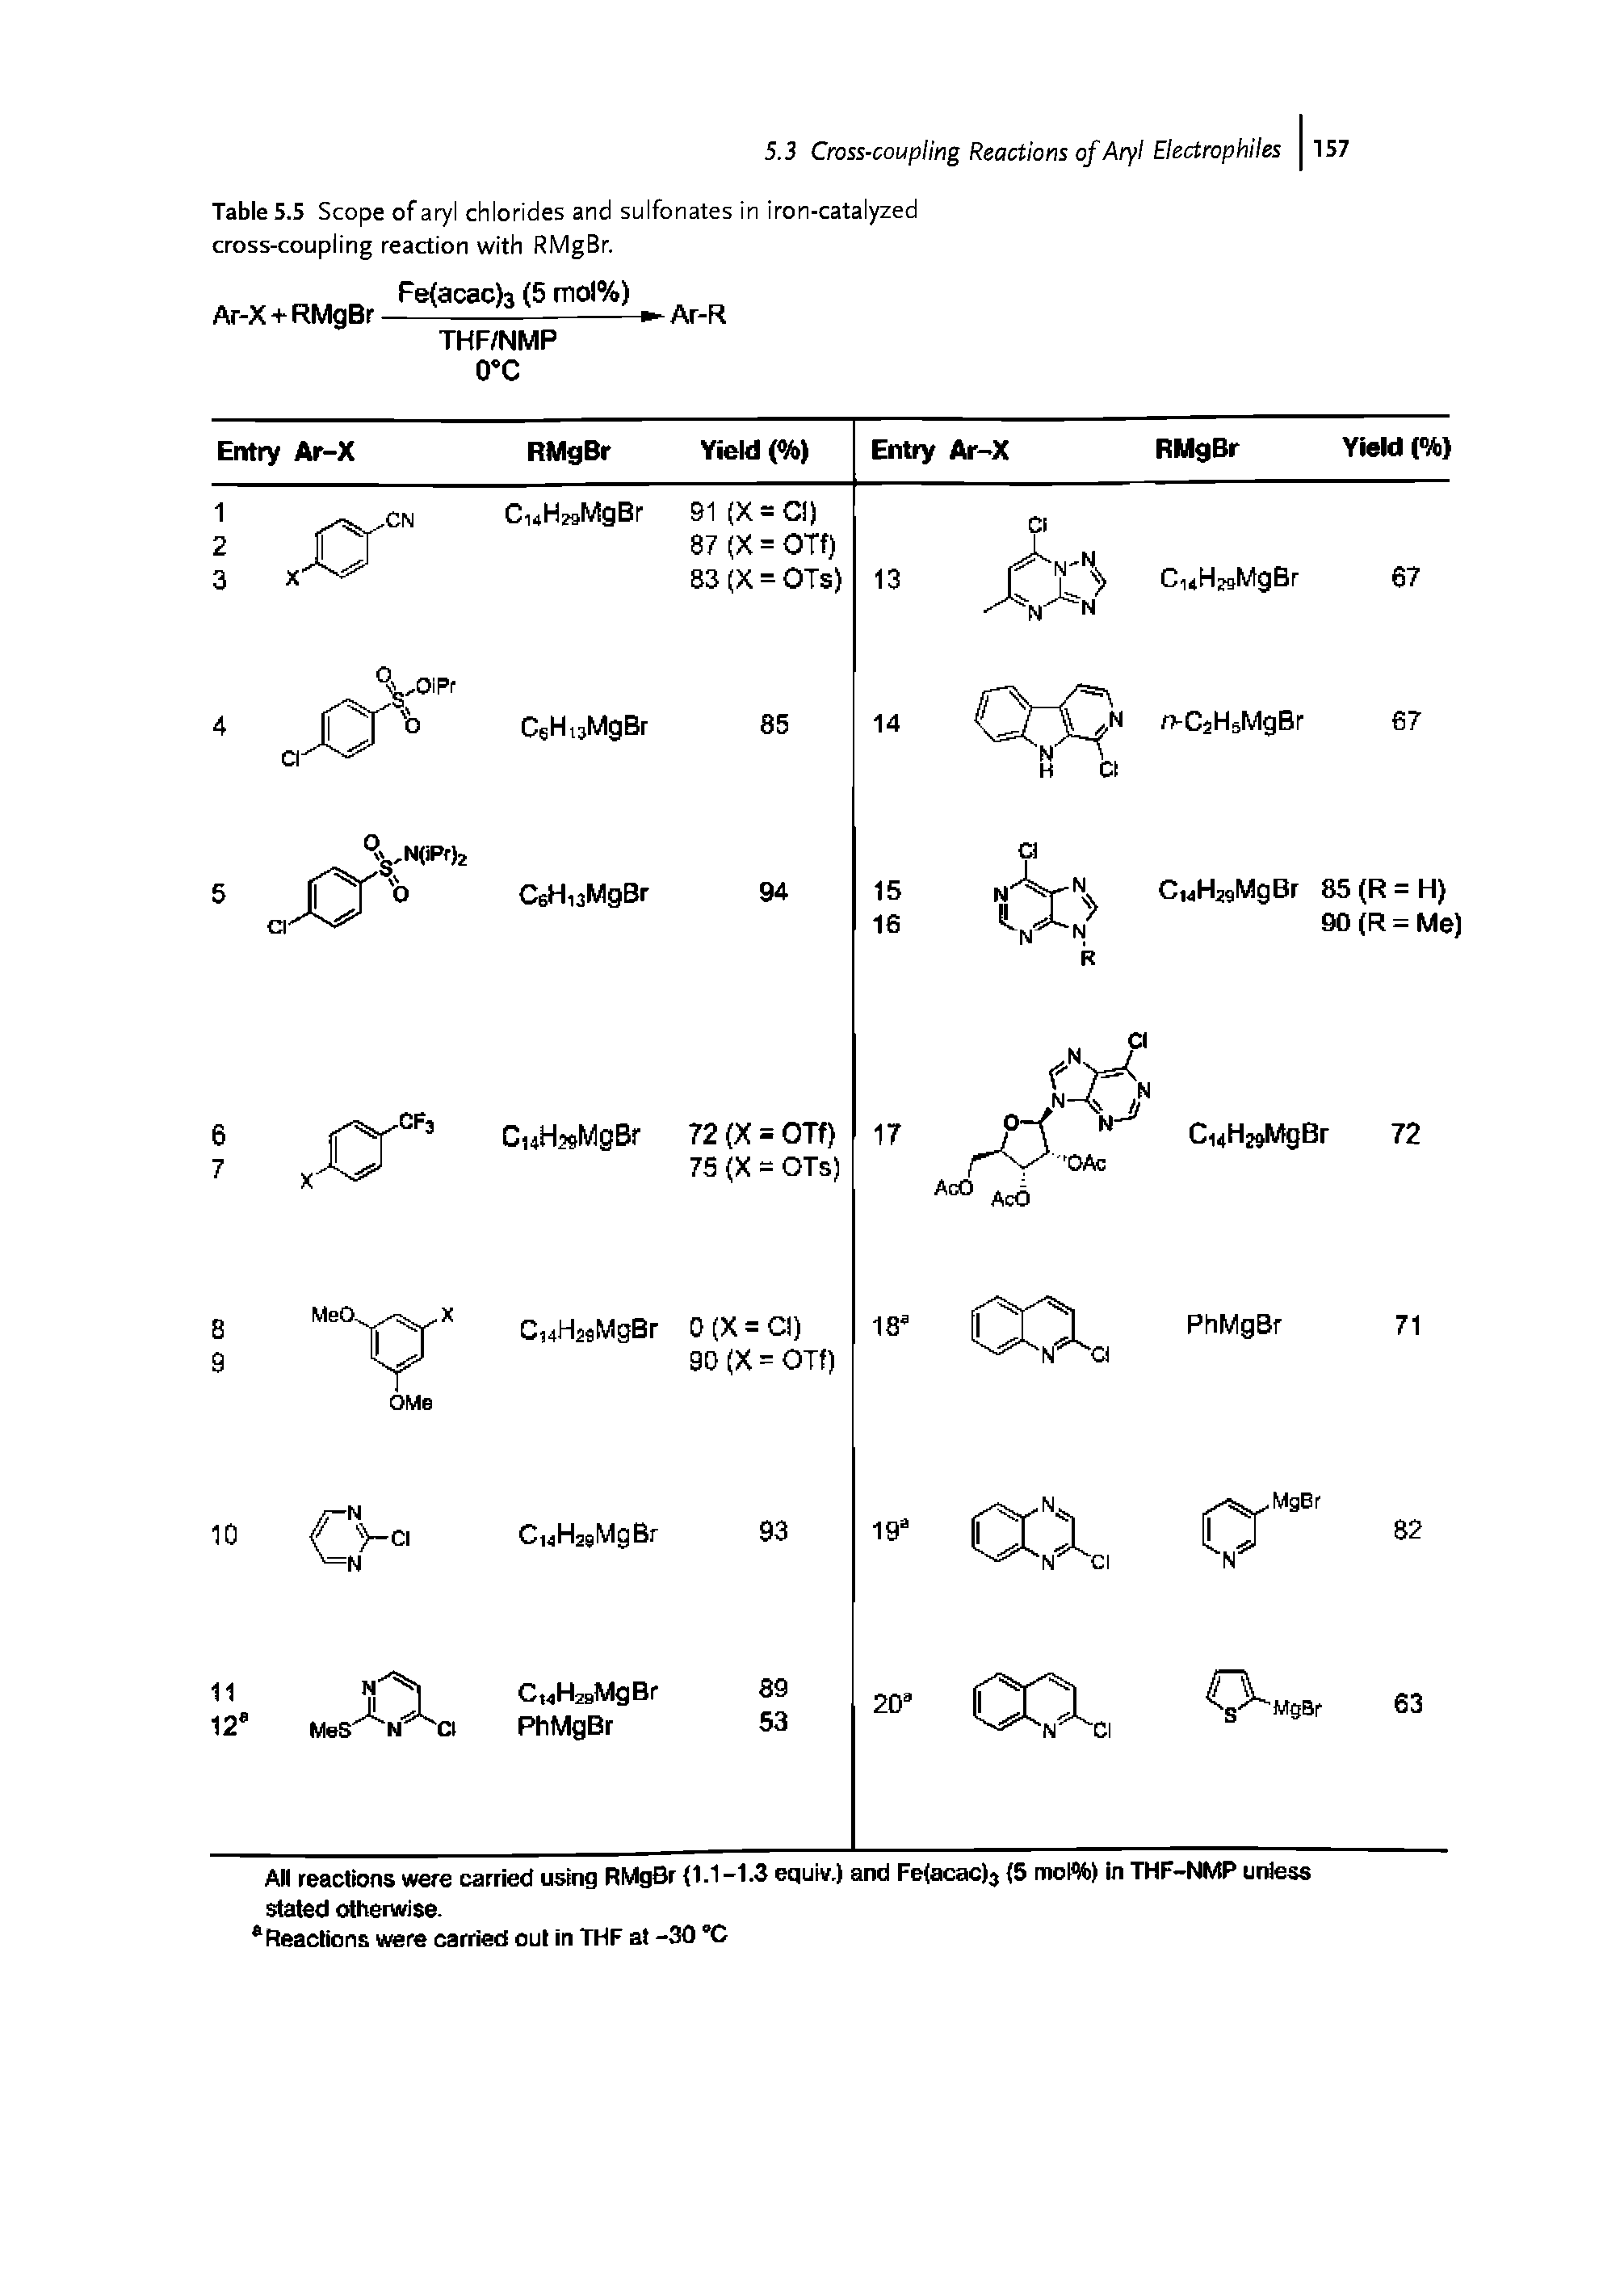 Table 5.5 Scope of aryl chlorides and sulfonates in iron-catalyzed cross-coupling reaction with RMgBr.